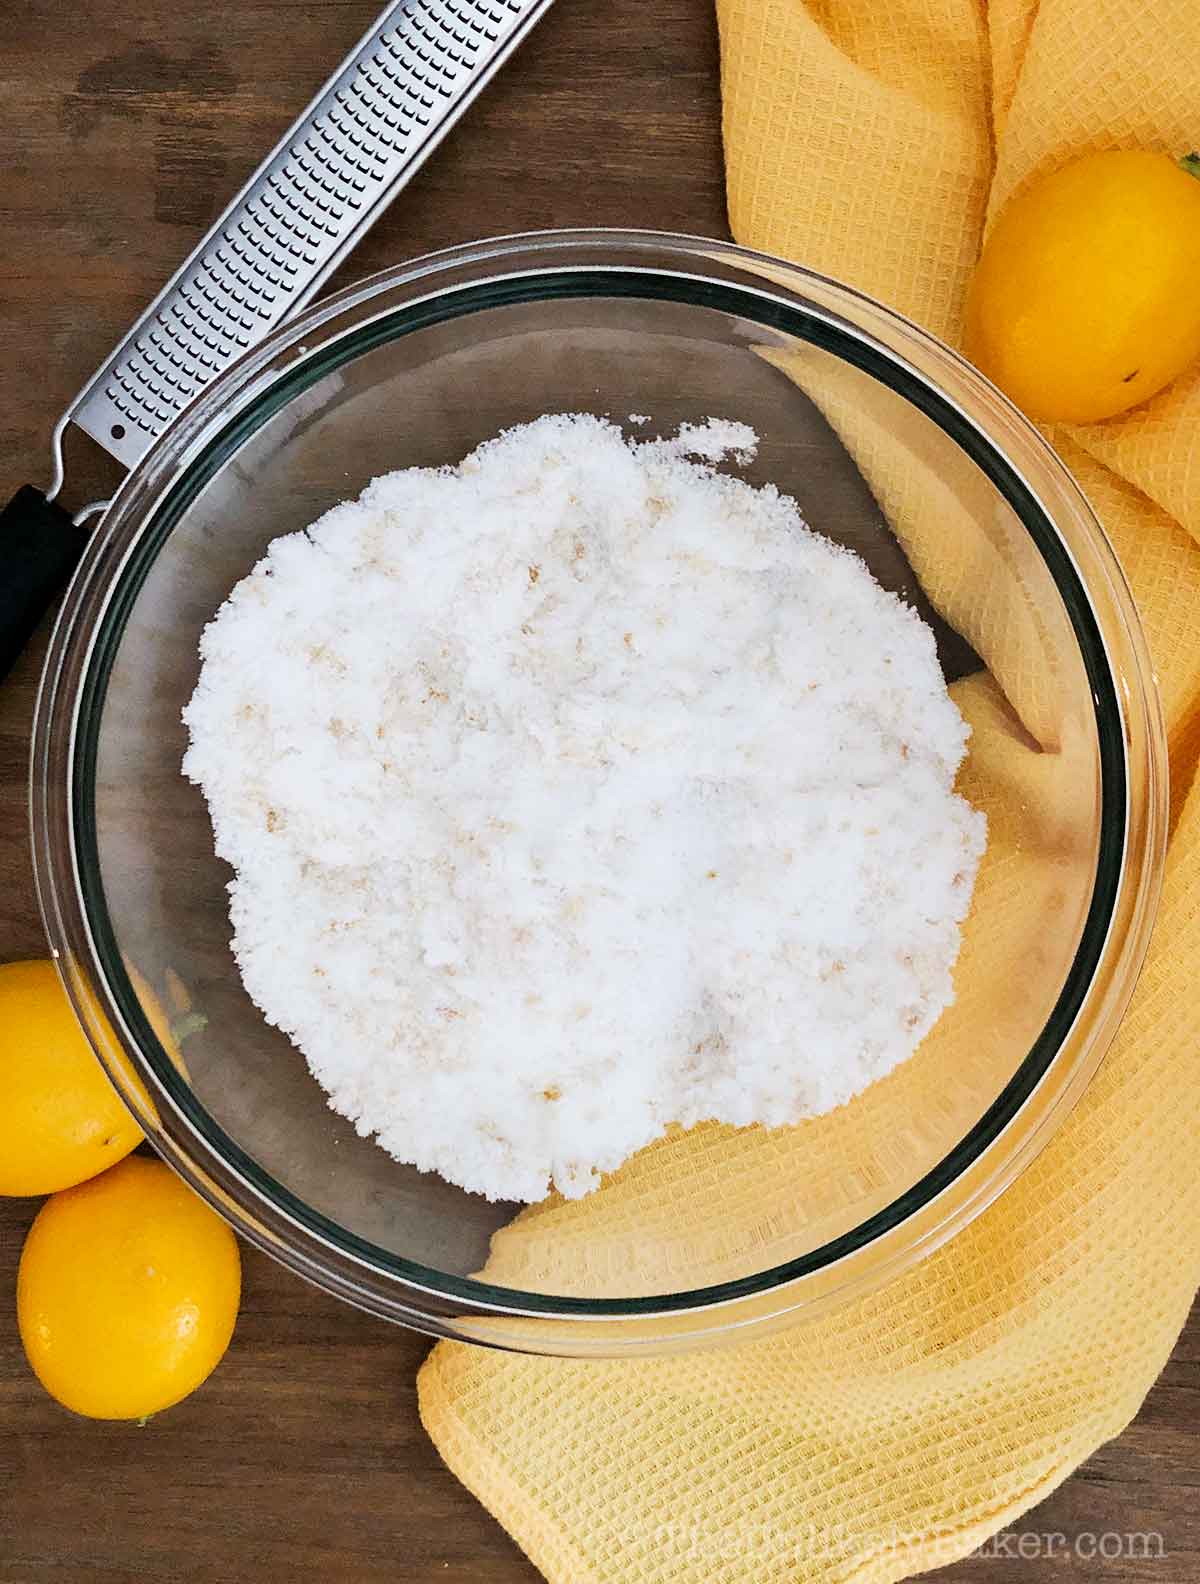 Lemon zest and sugar mixed in a bowl